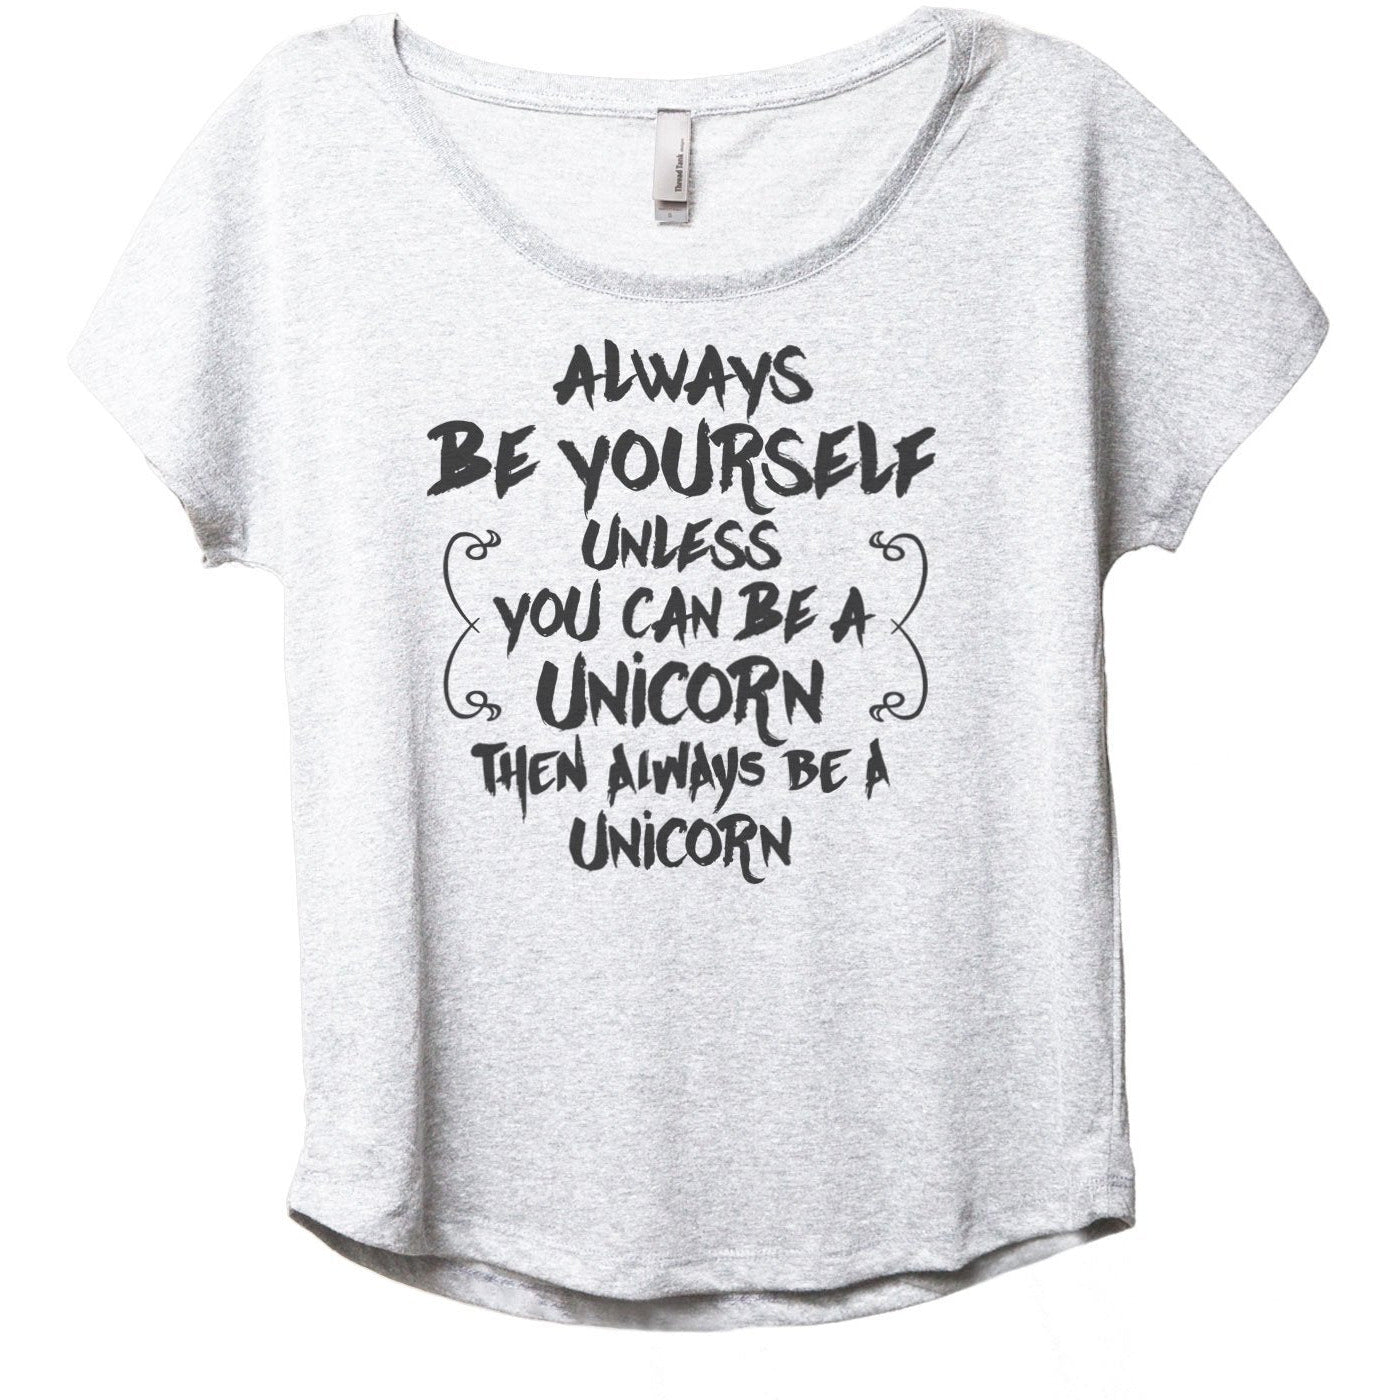 Always Be Yourself, Unicorn - Stories You Can Wear